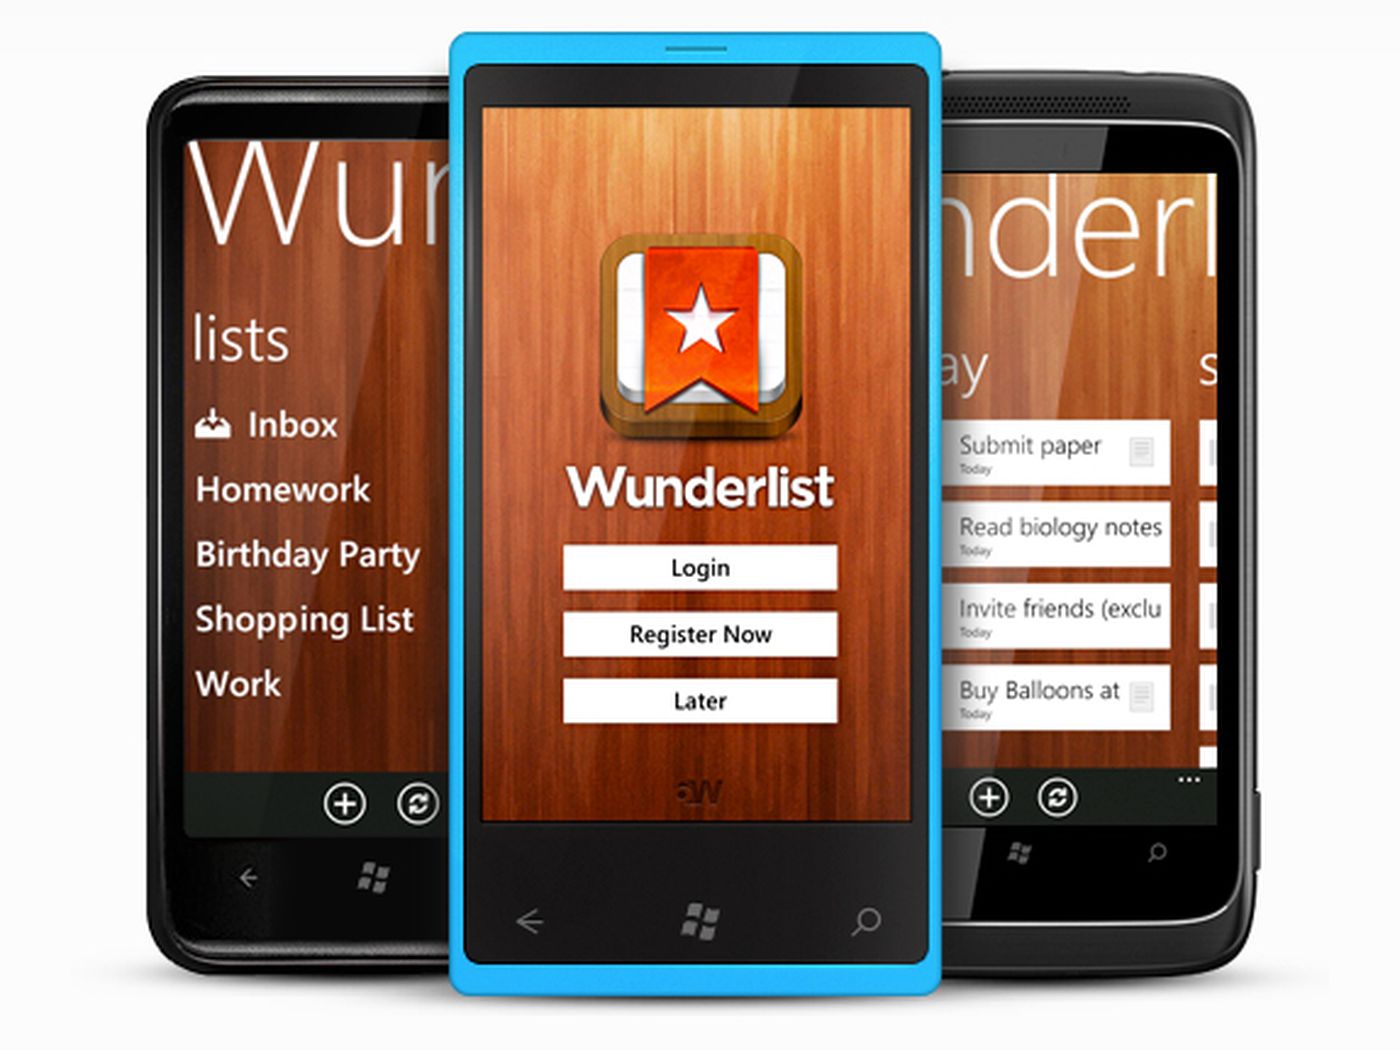 Wunderlist founder offers to buy back app from Microsoft - The Verge